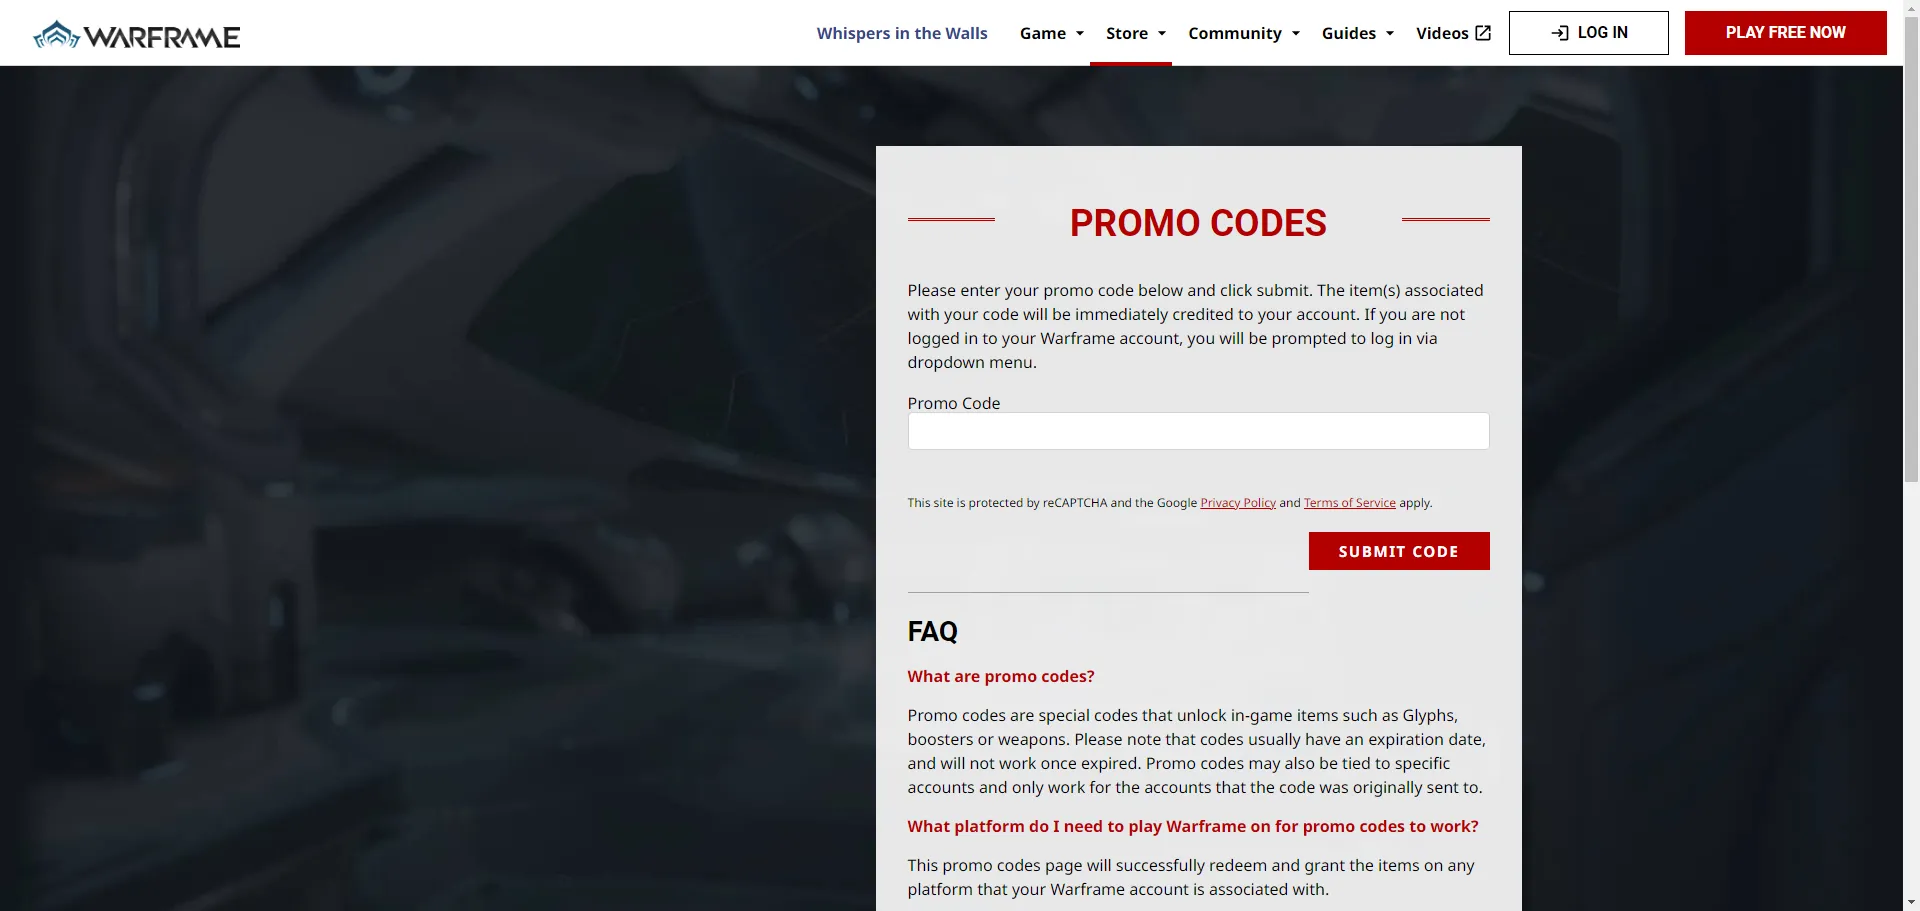 How to Redeem Promo Codes in Warframe